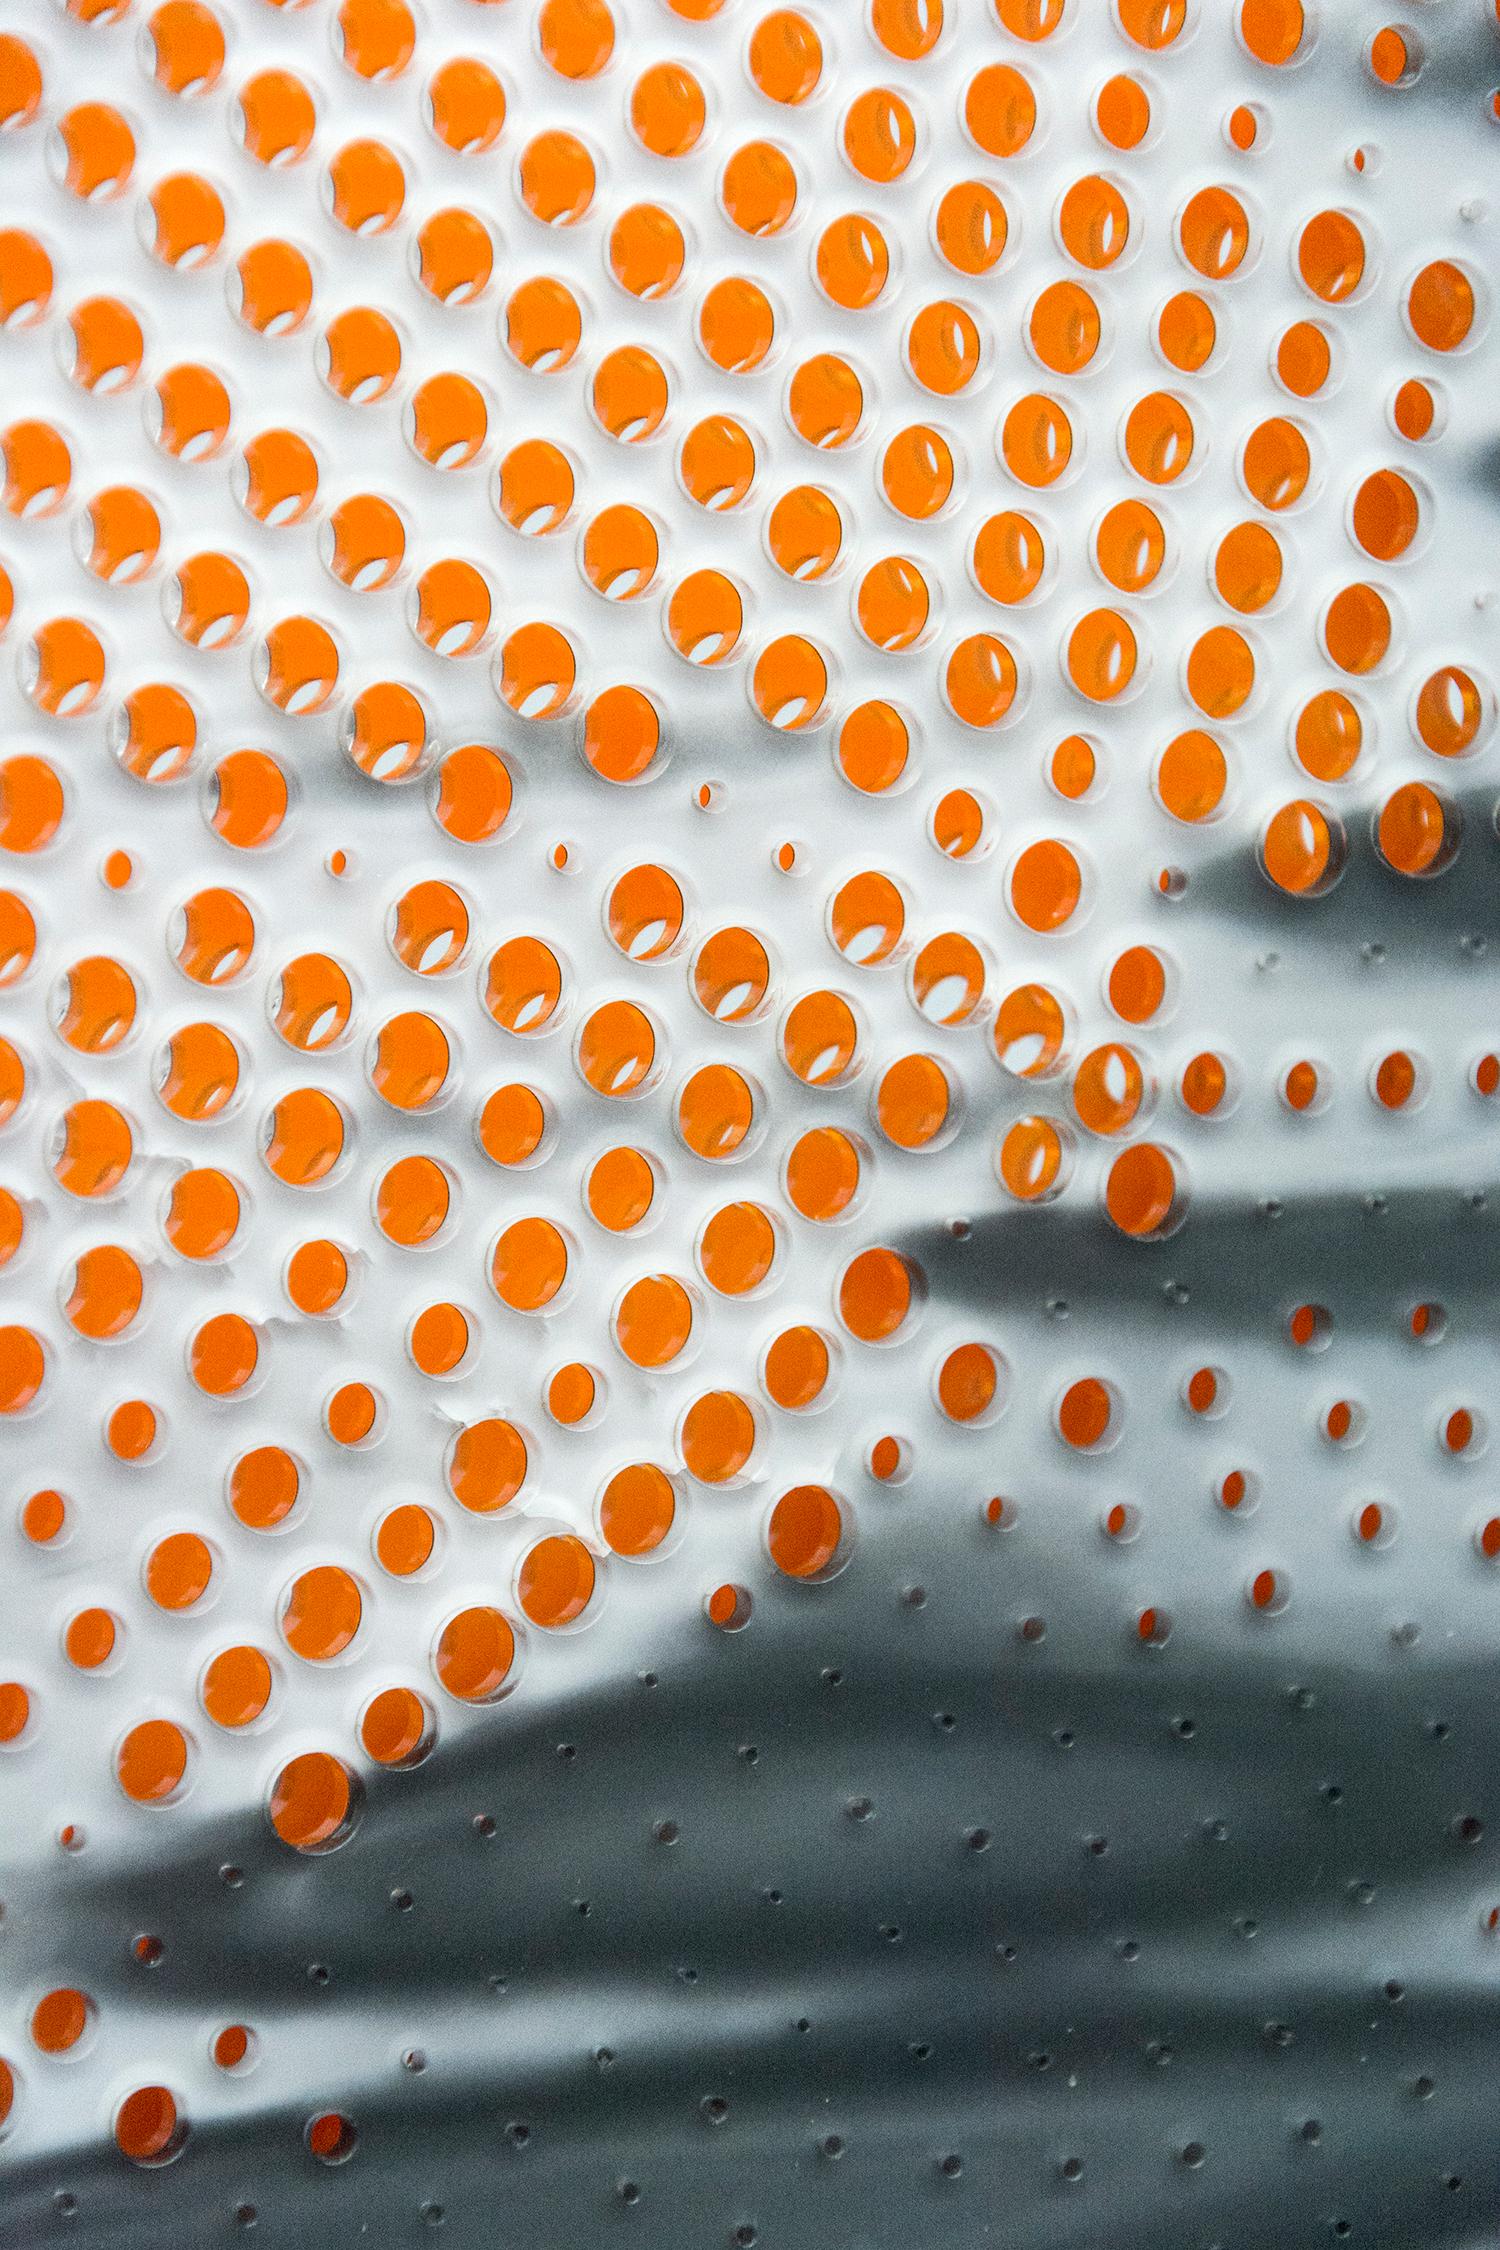 Ripple 1/10 - reflective tondo, black, white orange, photography, wall relief - Contemporary Photograph by Ryan Van Der Hout